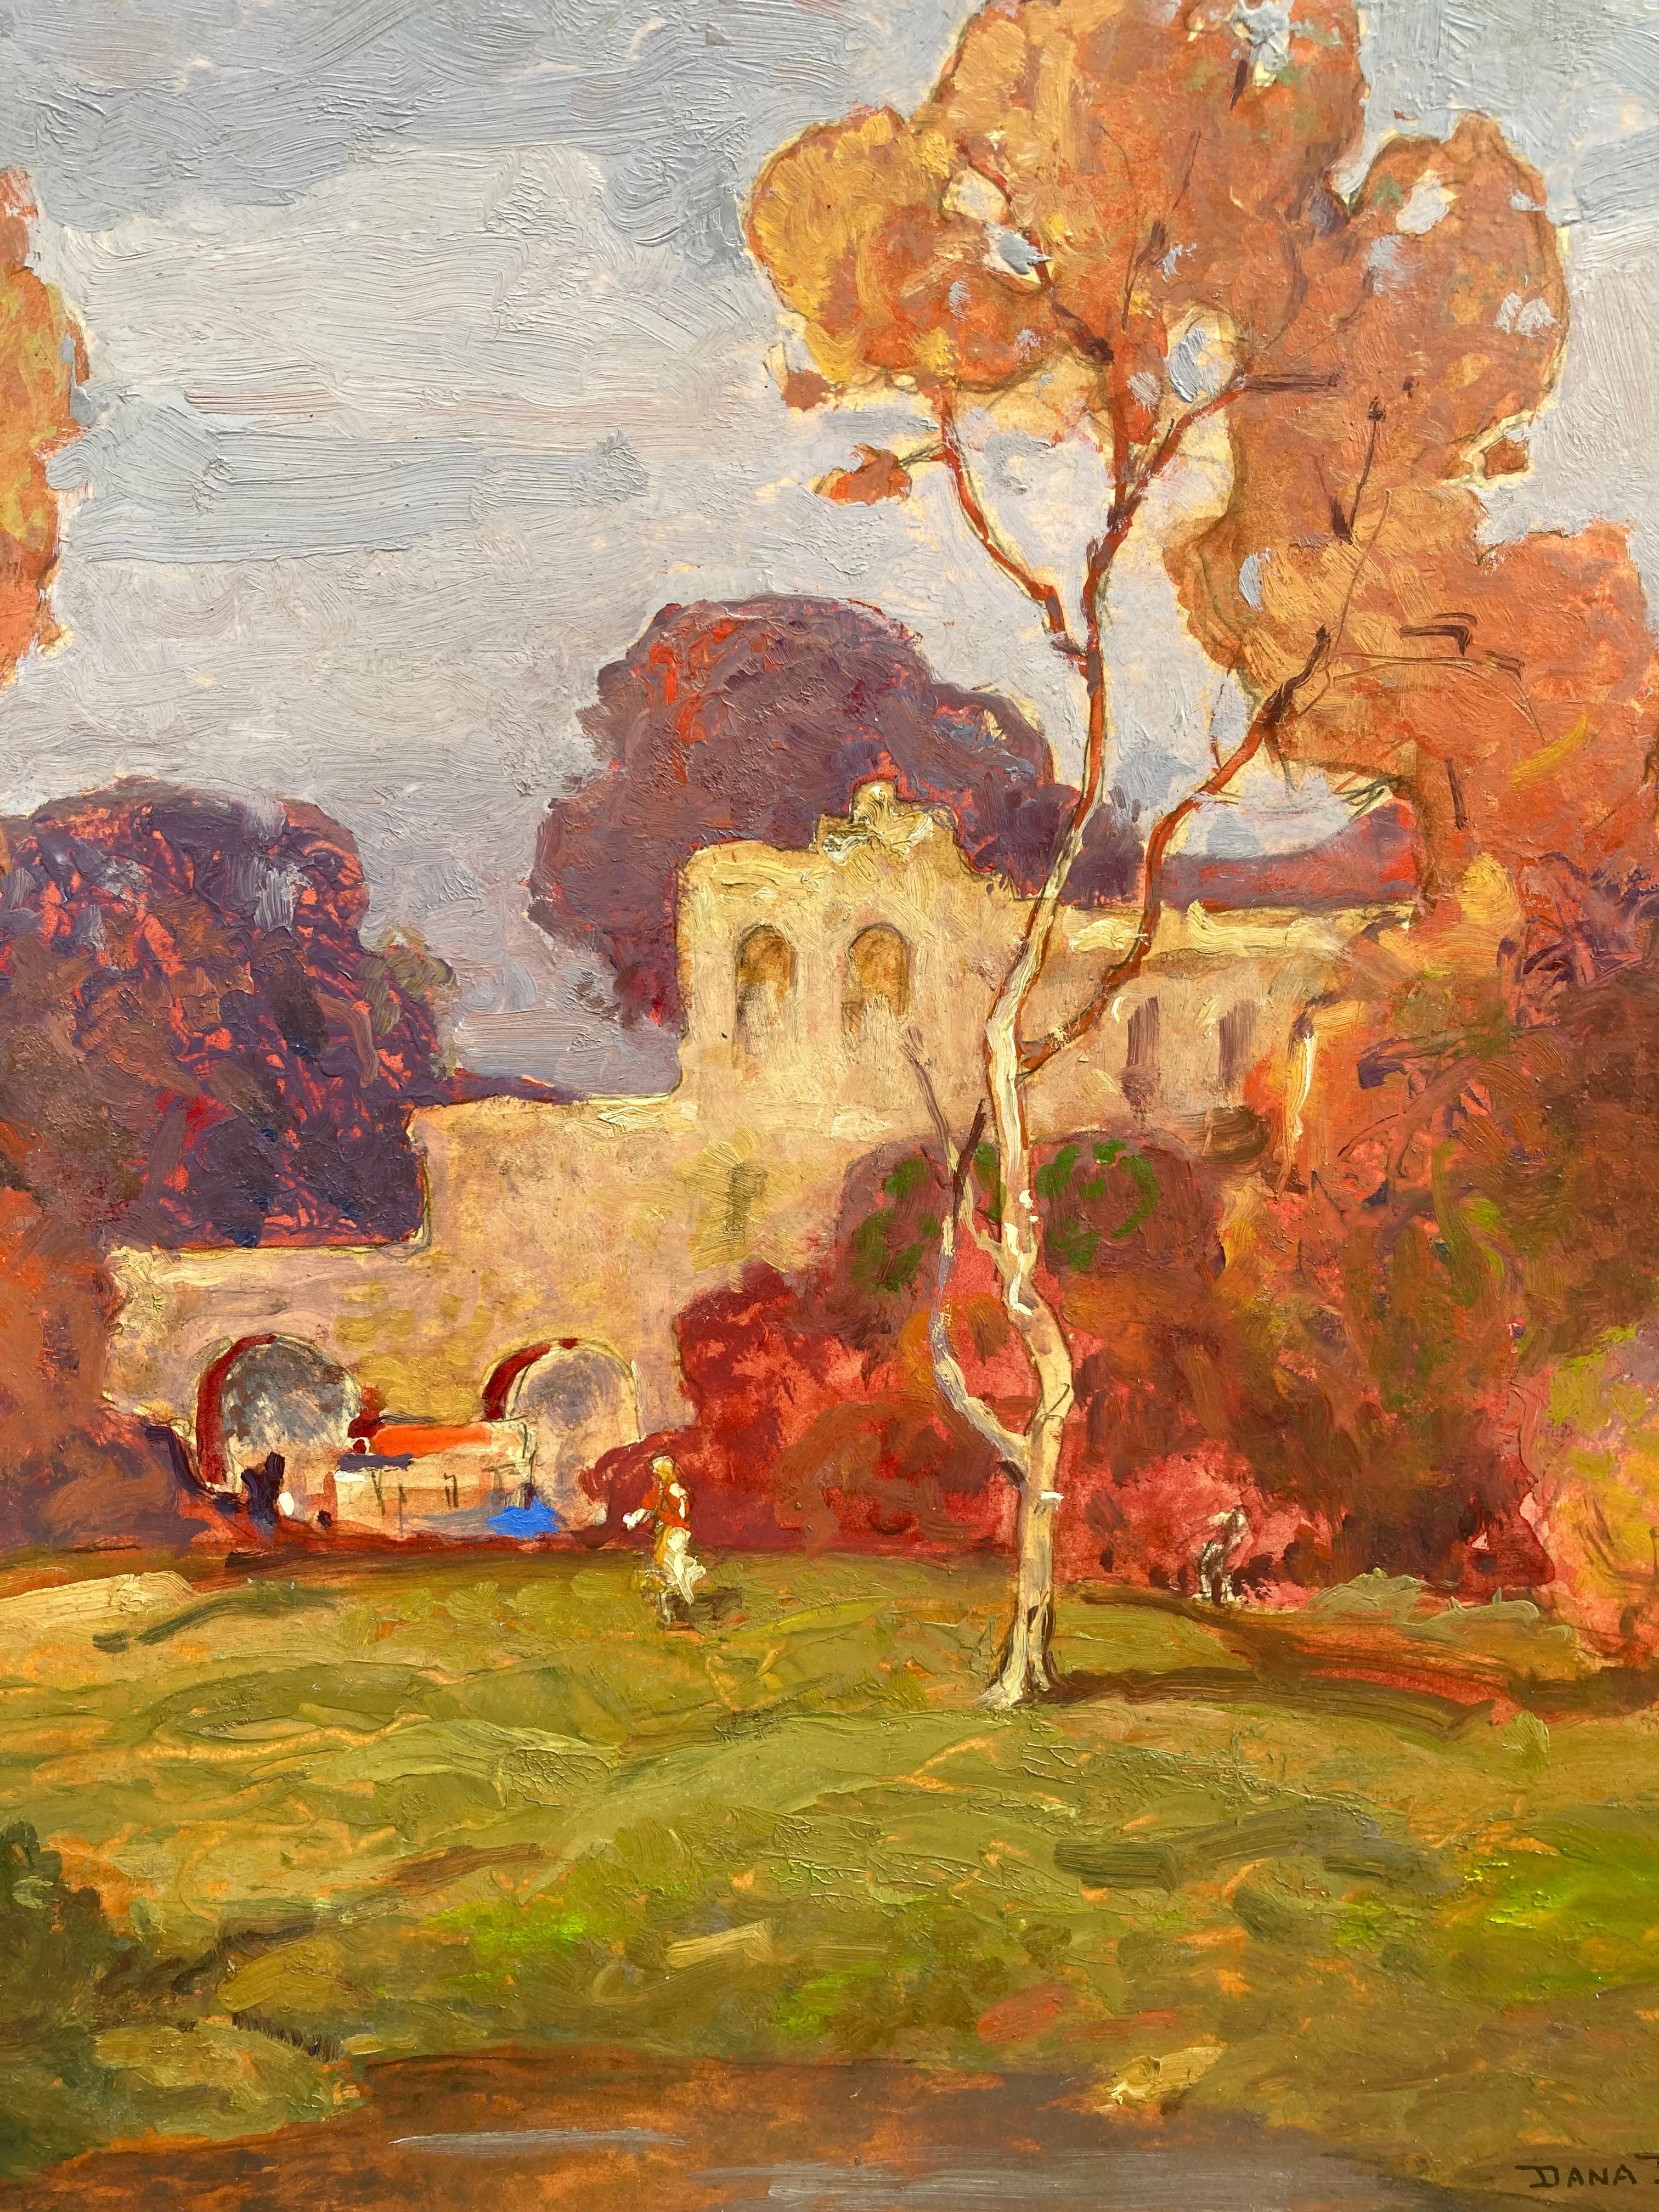 Old Spanish Mission, California (c. 1920) - Painting by Dana Bartlett